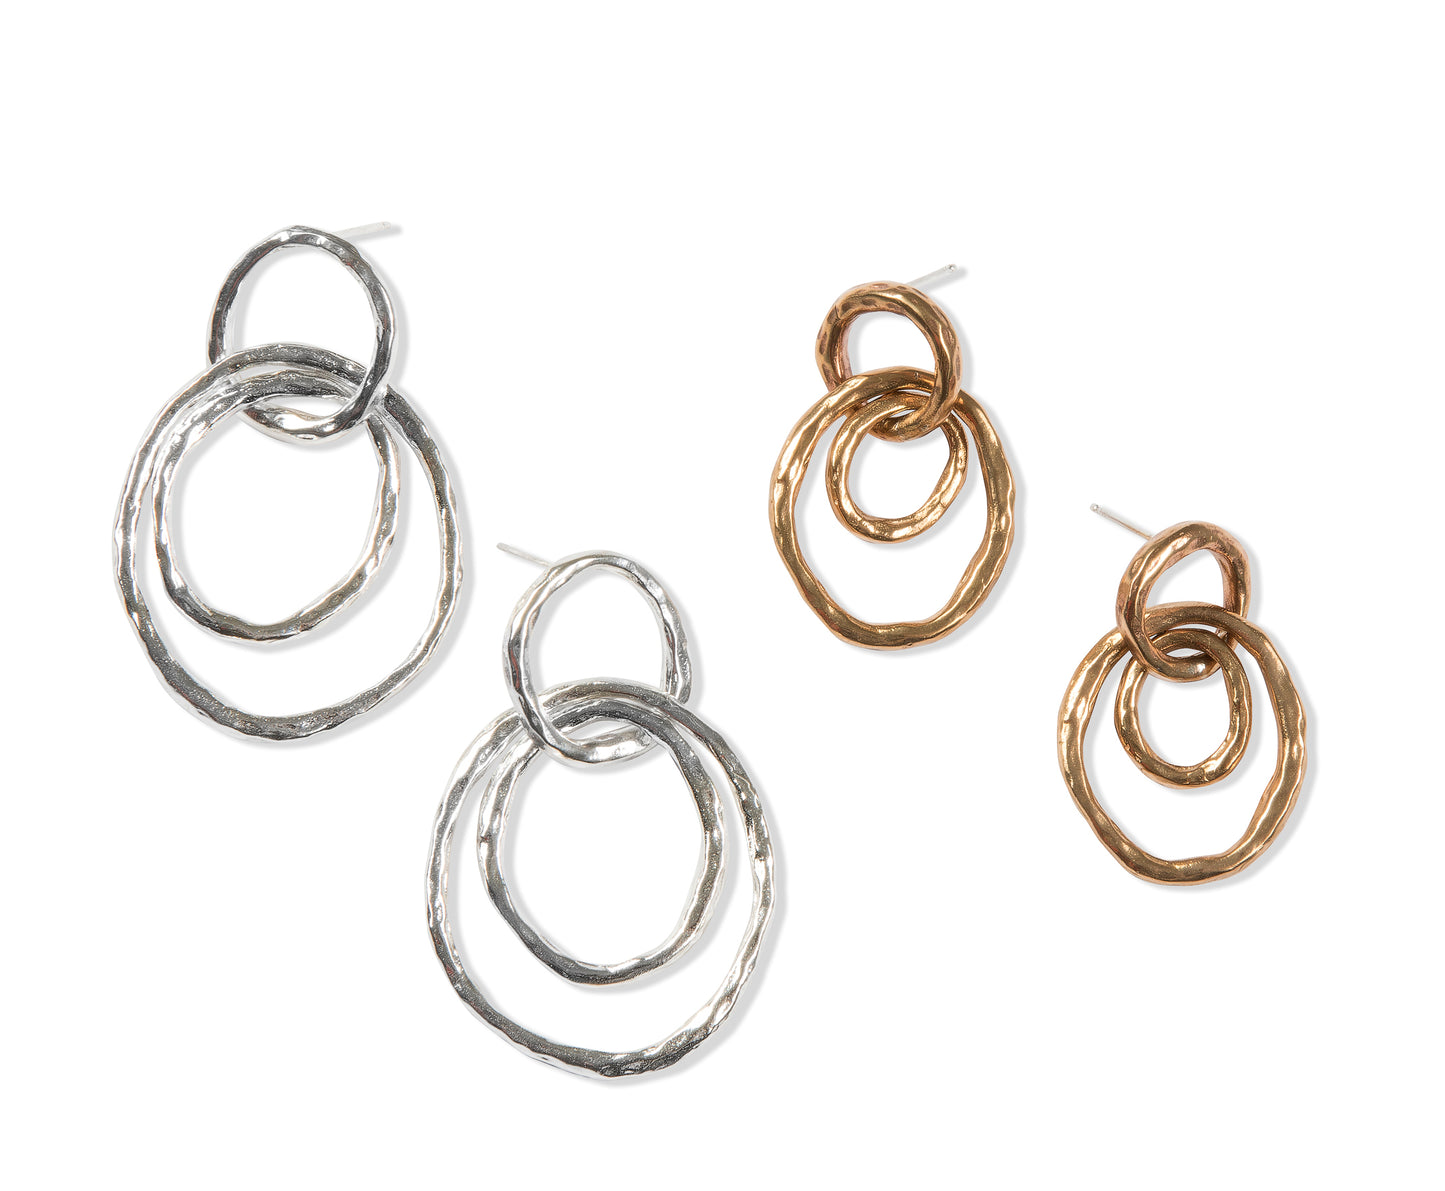 Small Silver Statement Hoops